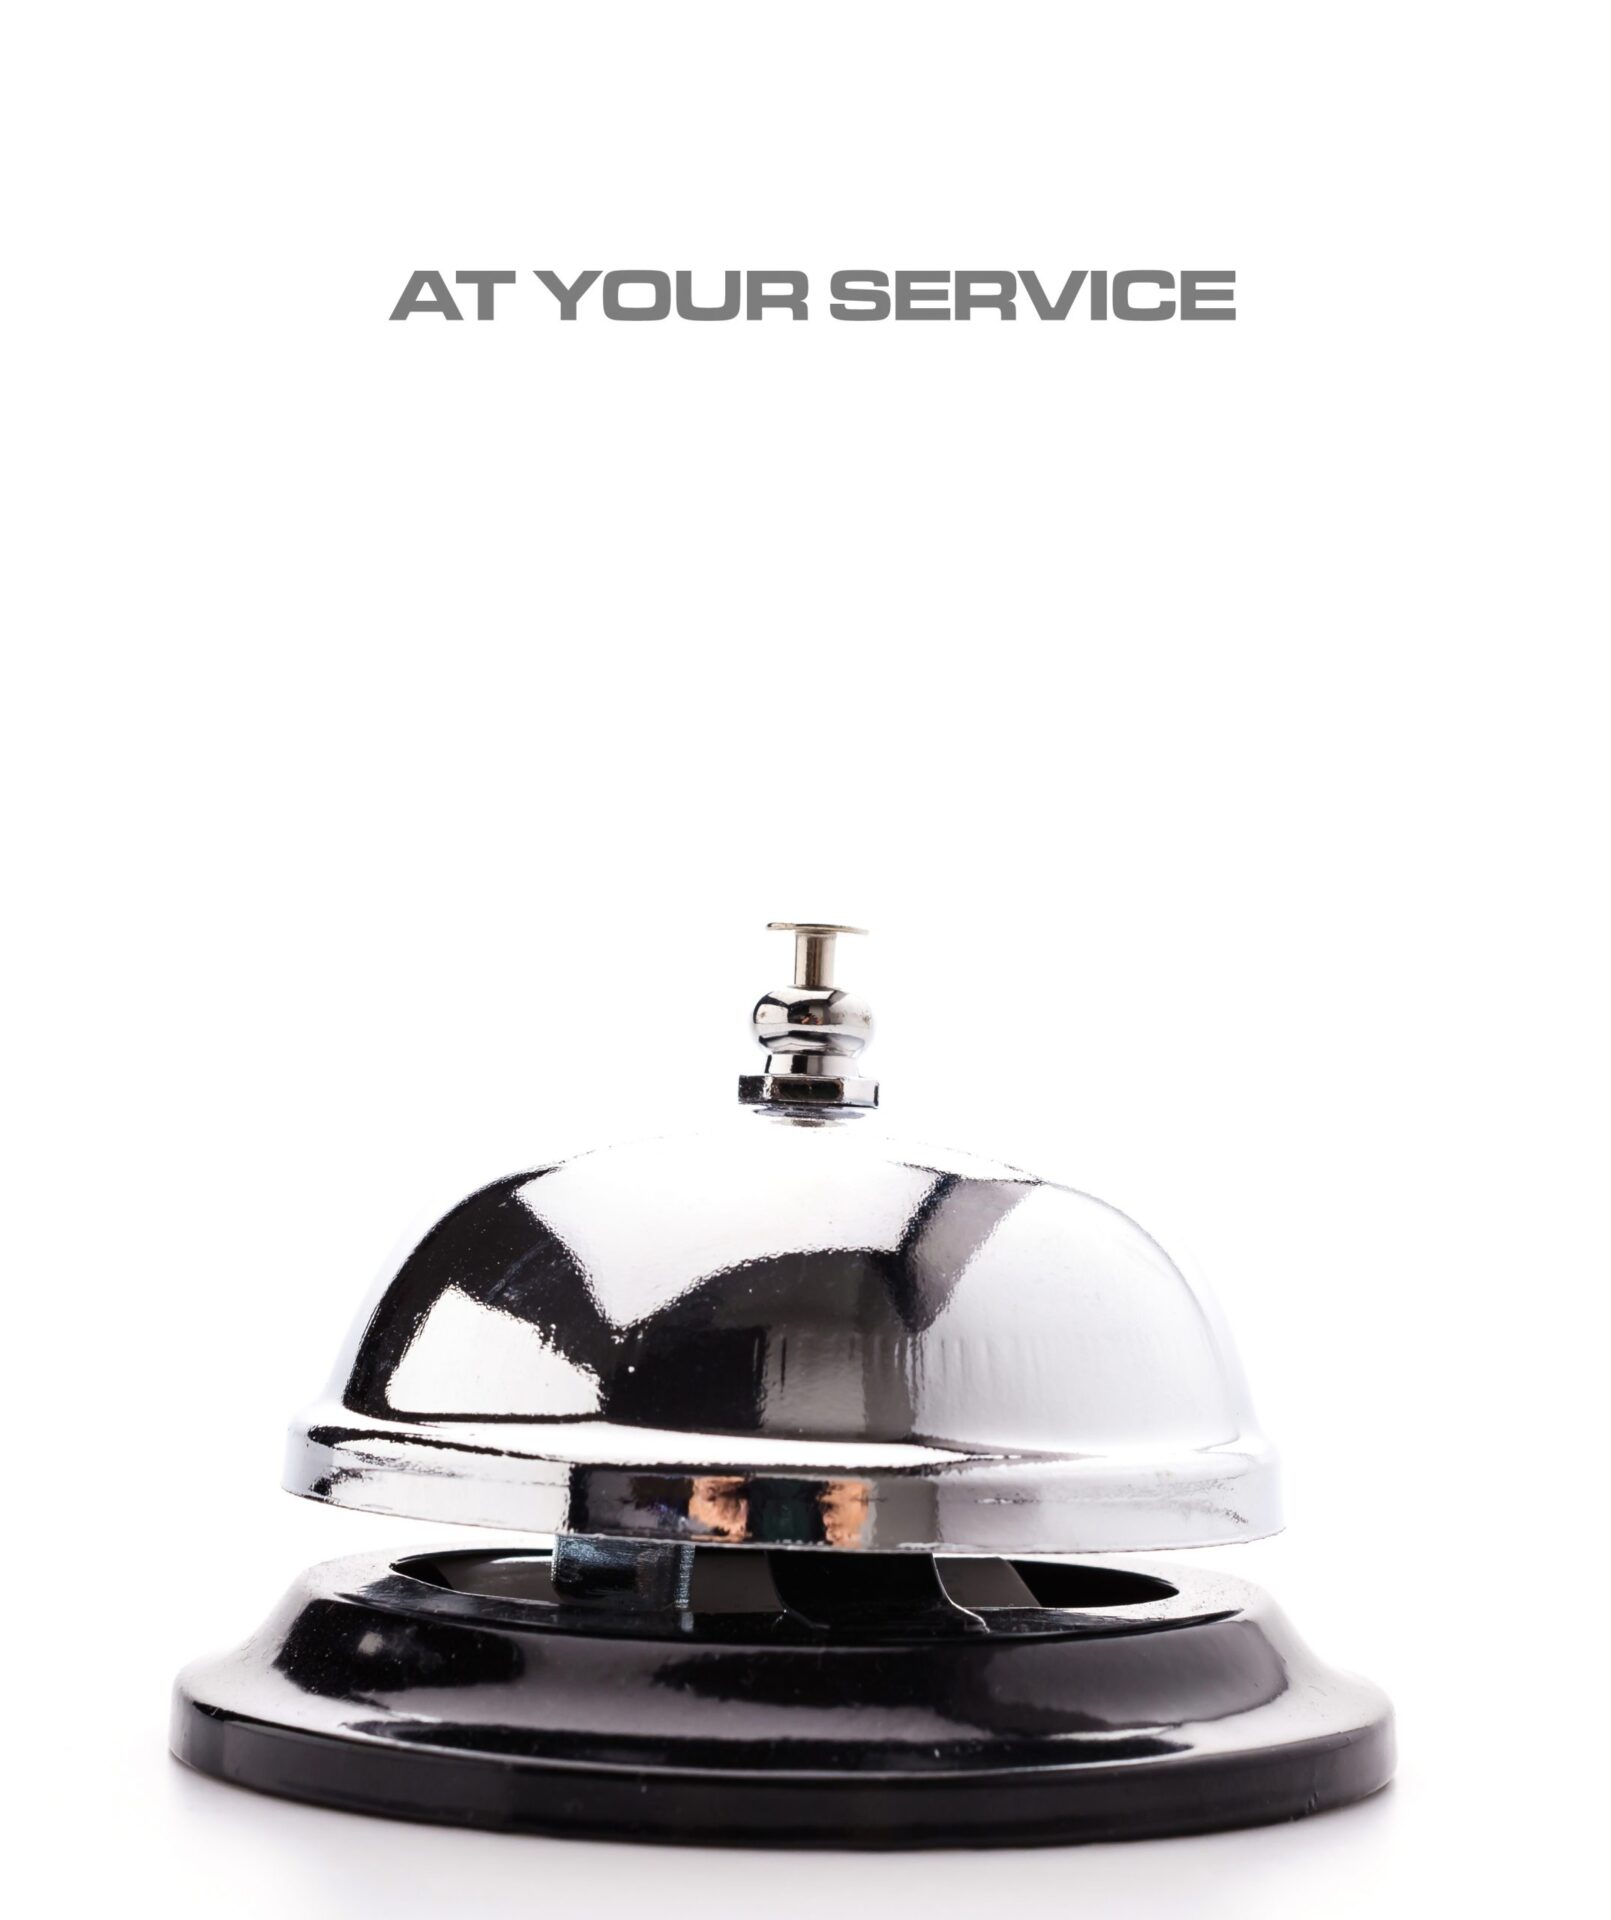 Service bell used in the restaurant industry